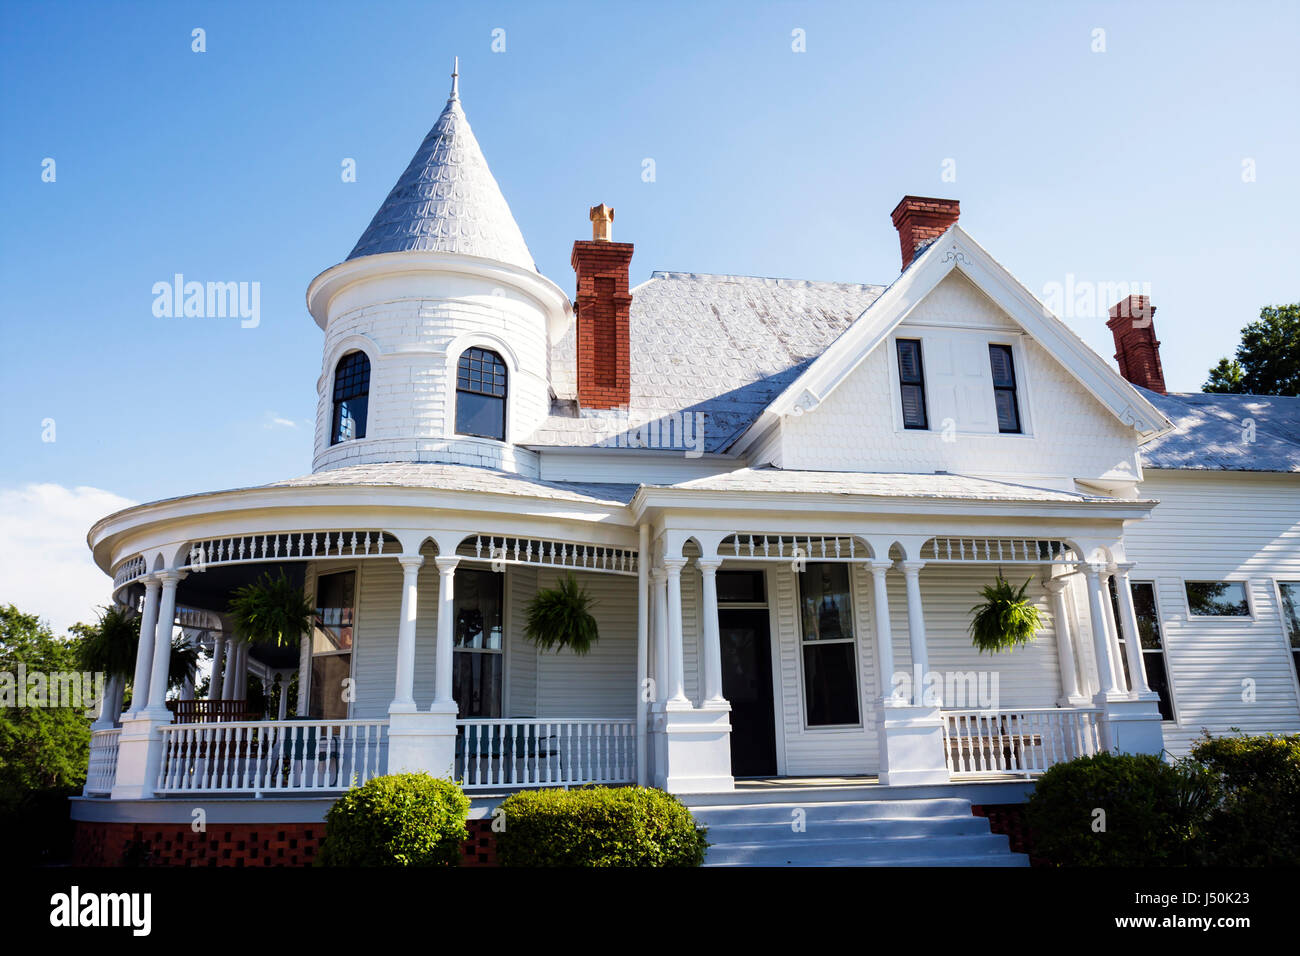 Alabama,Bullock County,Union Springs,Powell Street,Methodist Parsonage,Eley house,houses,1905,Queen Anne,turret with conical roof,porch,AL080518047 Stock Photo